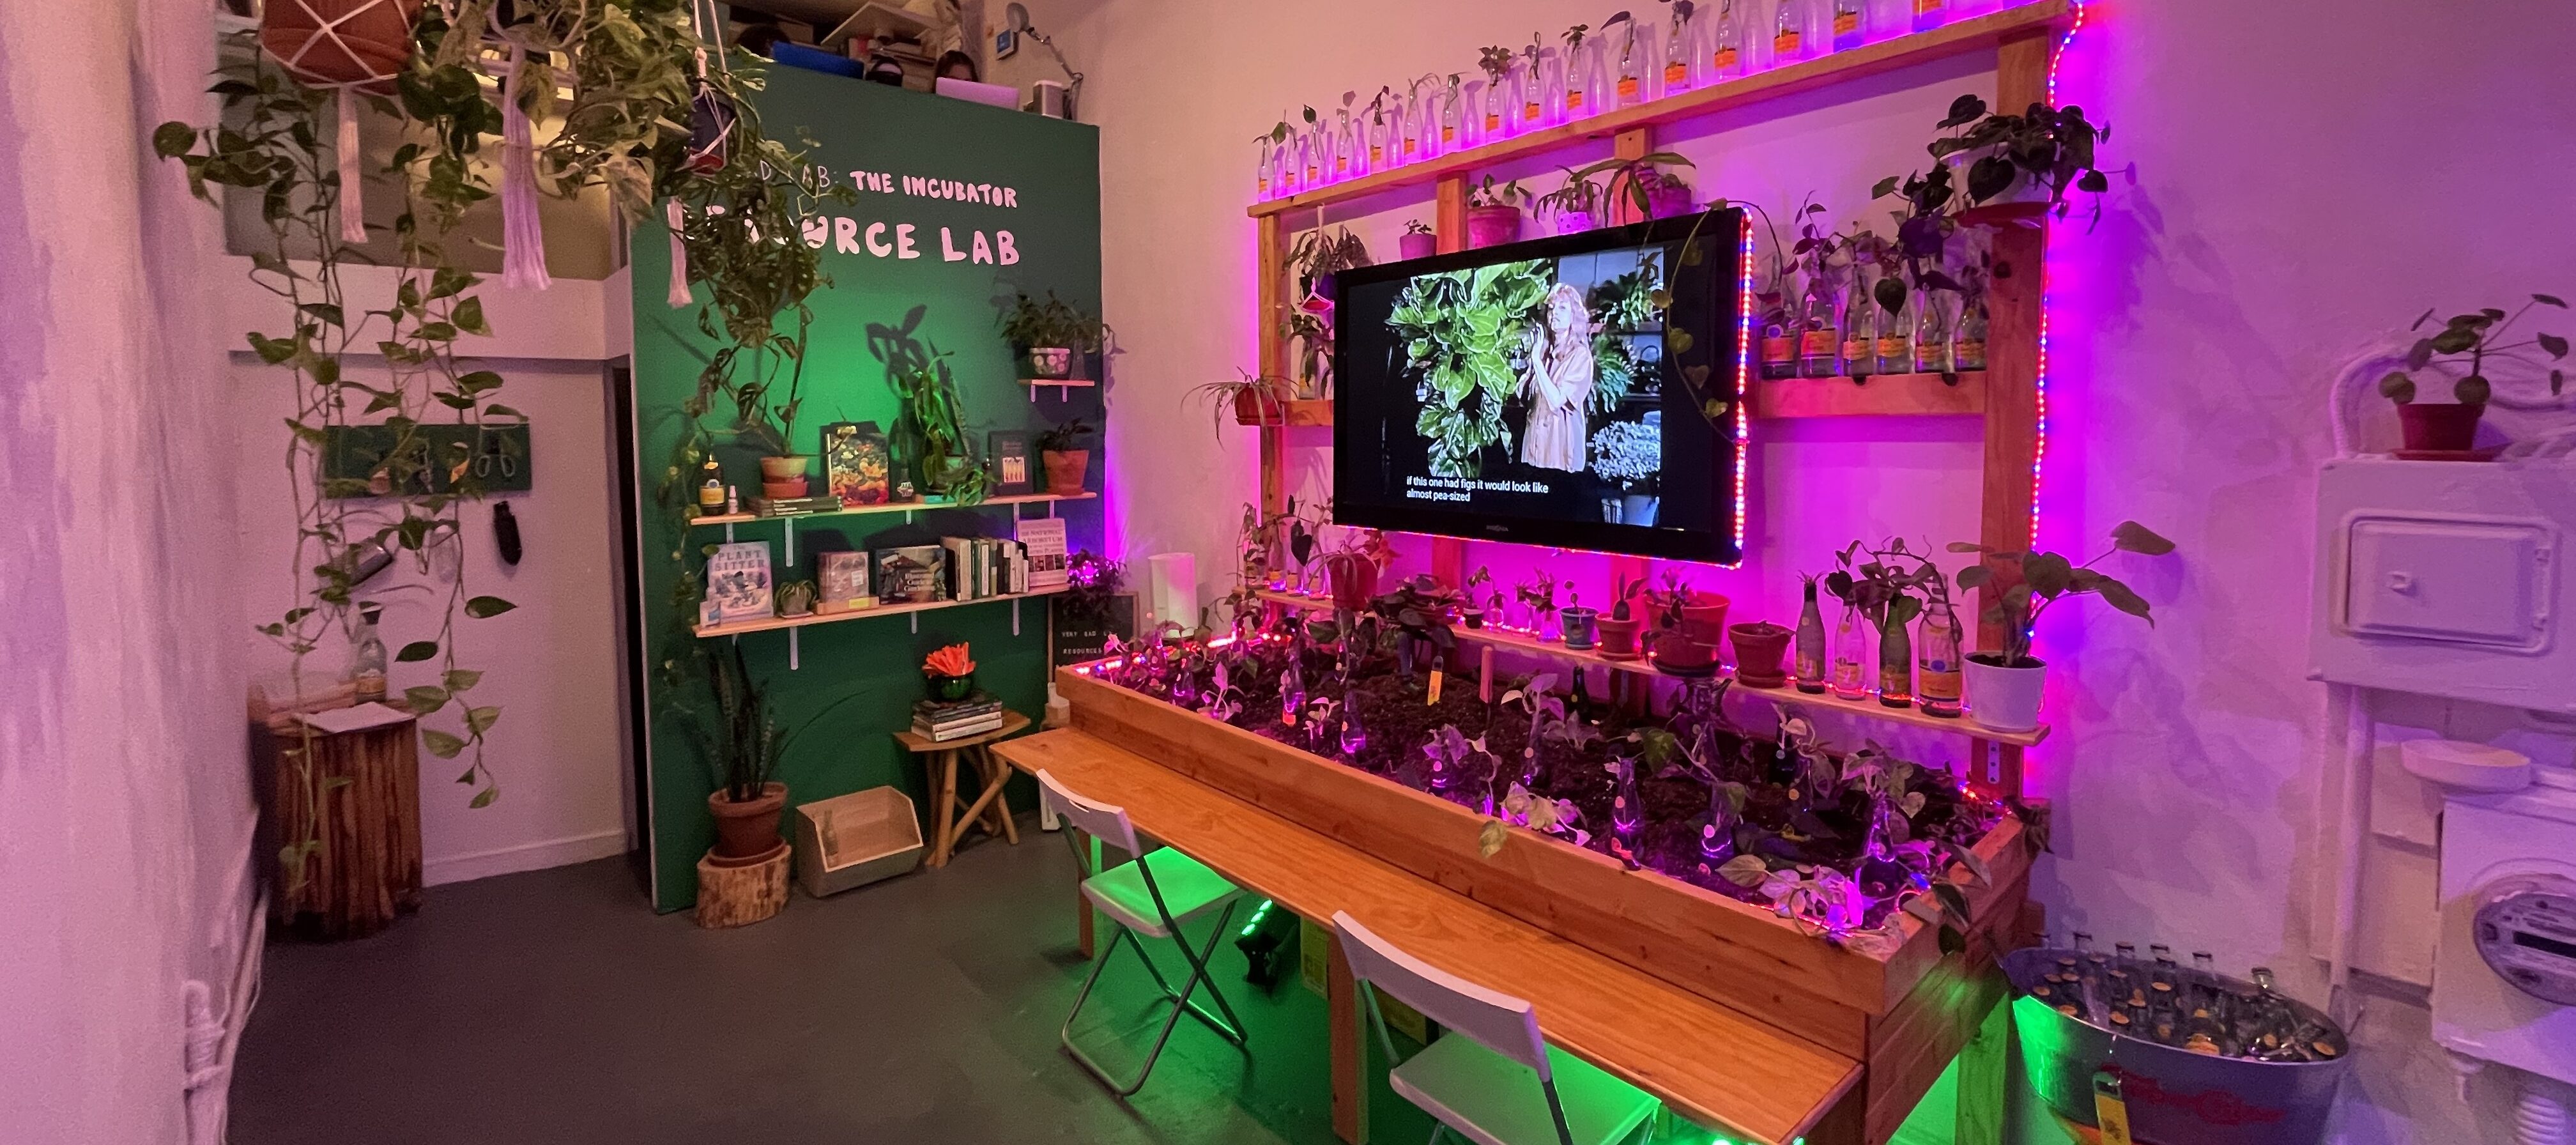 An installation view of a tiny gallery space shows a long wood desk and shelving set up against one wall, holding jars and pots of plant clippings with a flat screen TV mounted to the wall in the center. The back wall is painted green with white text on it: 